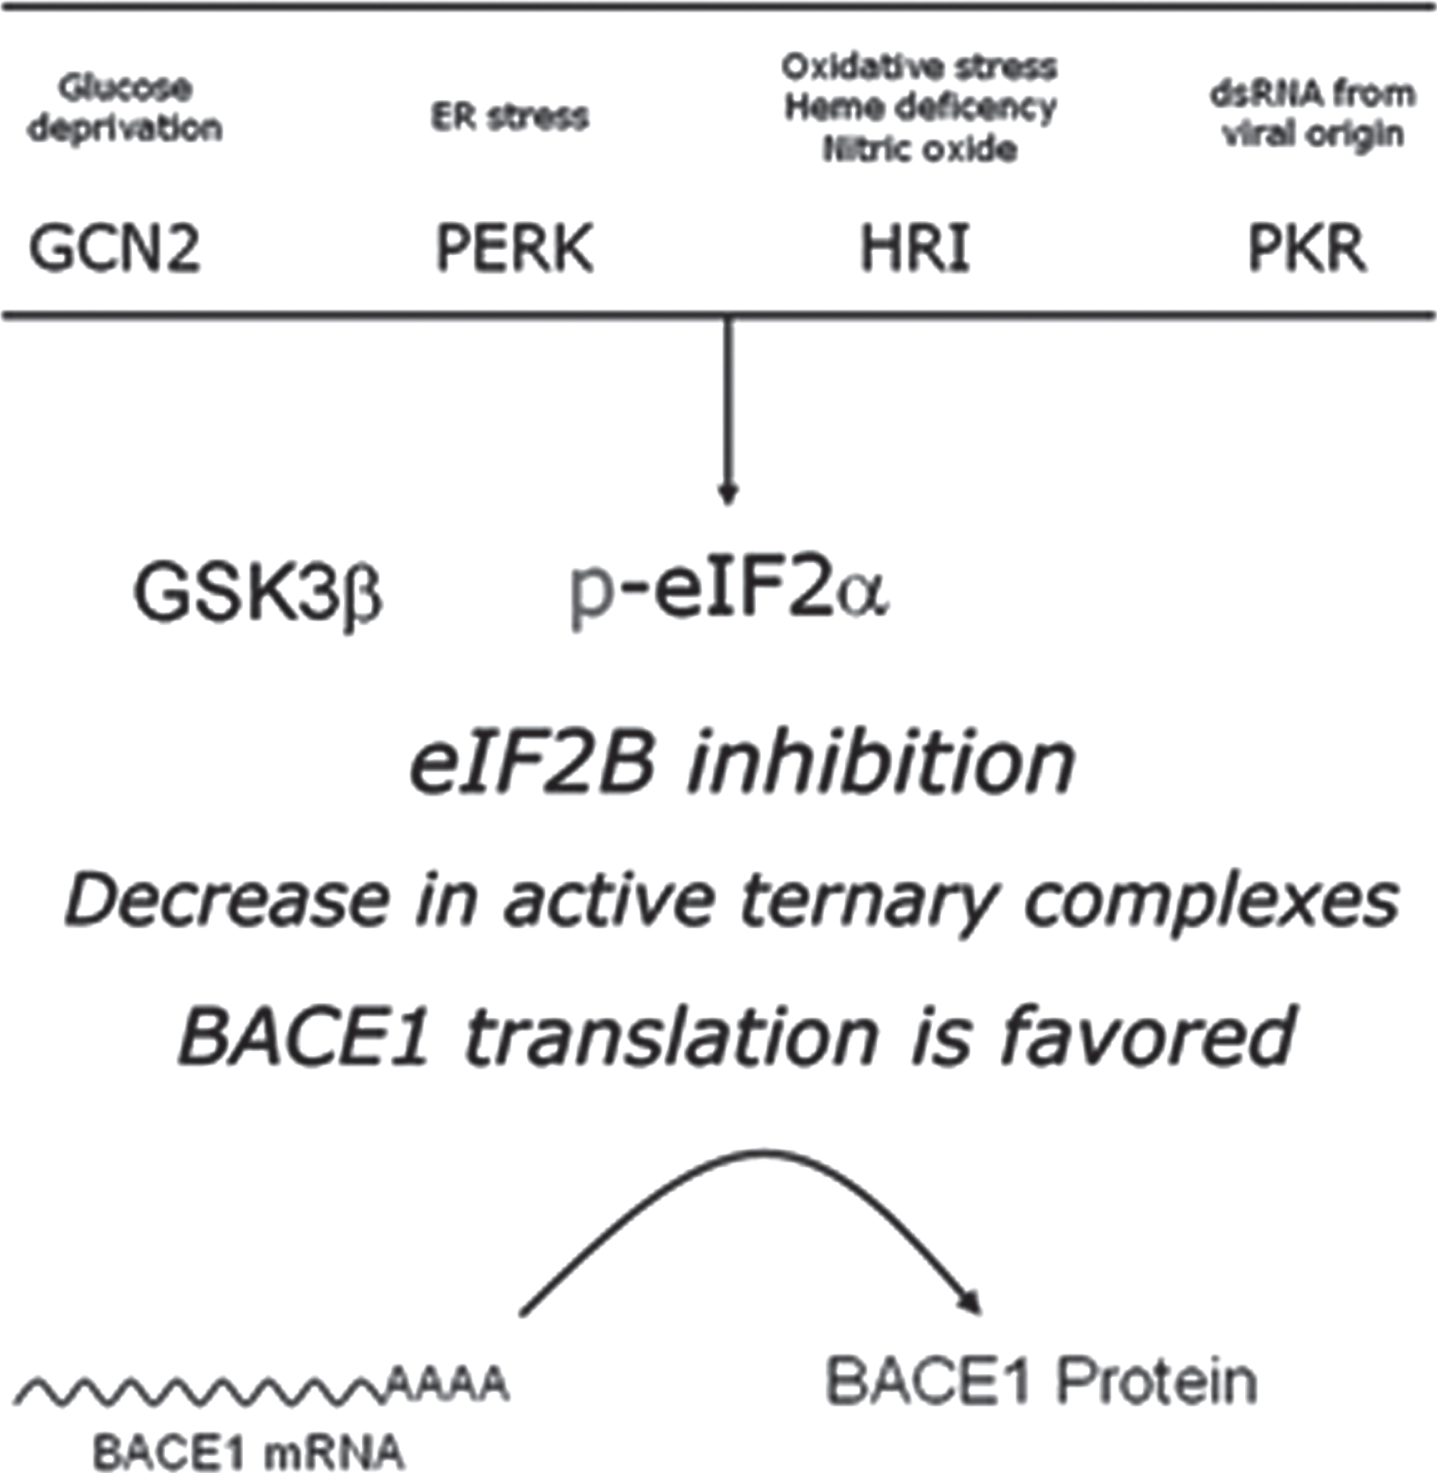 Intracellular signaling converging in eIF2B inhibition. The guanine-exchange activity of eIF2B can be modulated in response to stimuli conveyed by two alterative pathways. On the one hand, phosphorylation of the eukariotic initiation 2-alpha (eIF2α) is mediated by four different stress-activated eIF2α kinases (PERK, PKR, HRI, and GCN2), resulting in a competitive blockade of eIF2B. On the other hand, the otherwise constitutively inhibited Glycogen synthase kinase 3β (GSK3β), when released from its inhibition, catalyzes a direct inhibitory phosphorylation upon eIF2B. s.r.s., small ribosomal subunit.